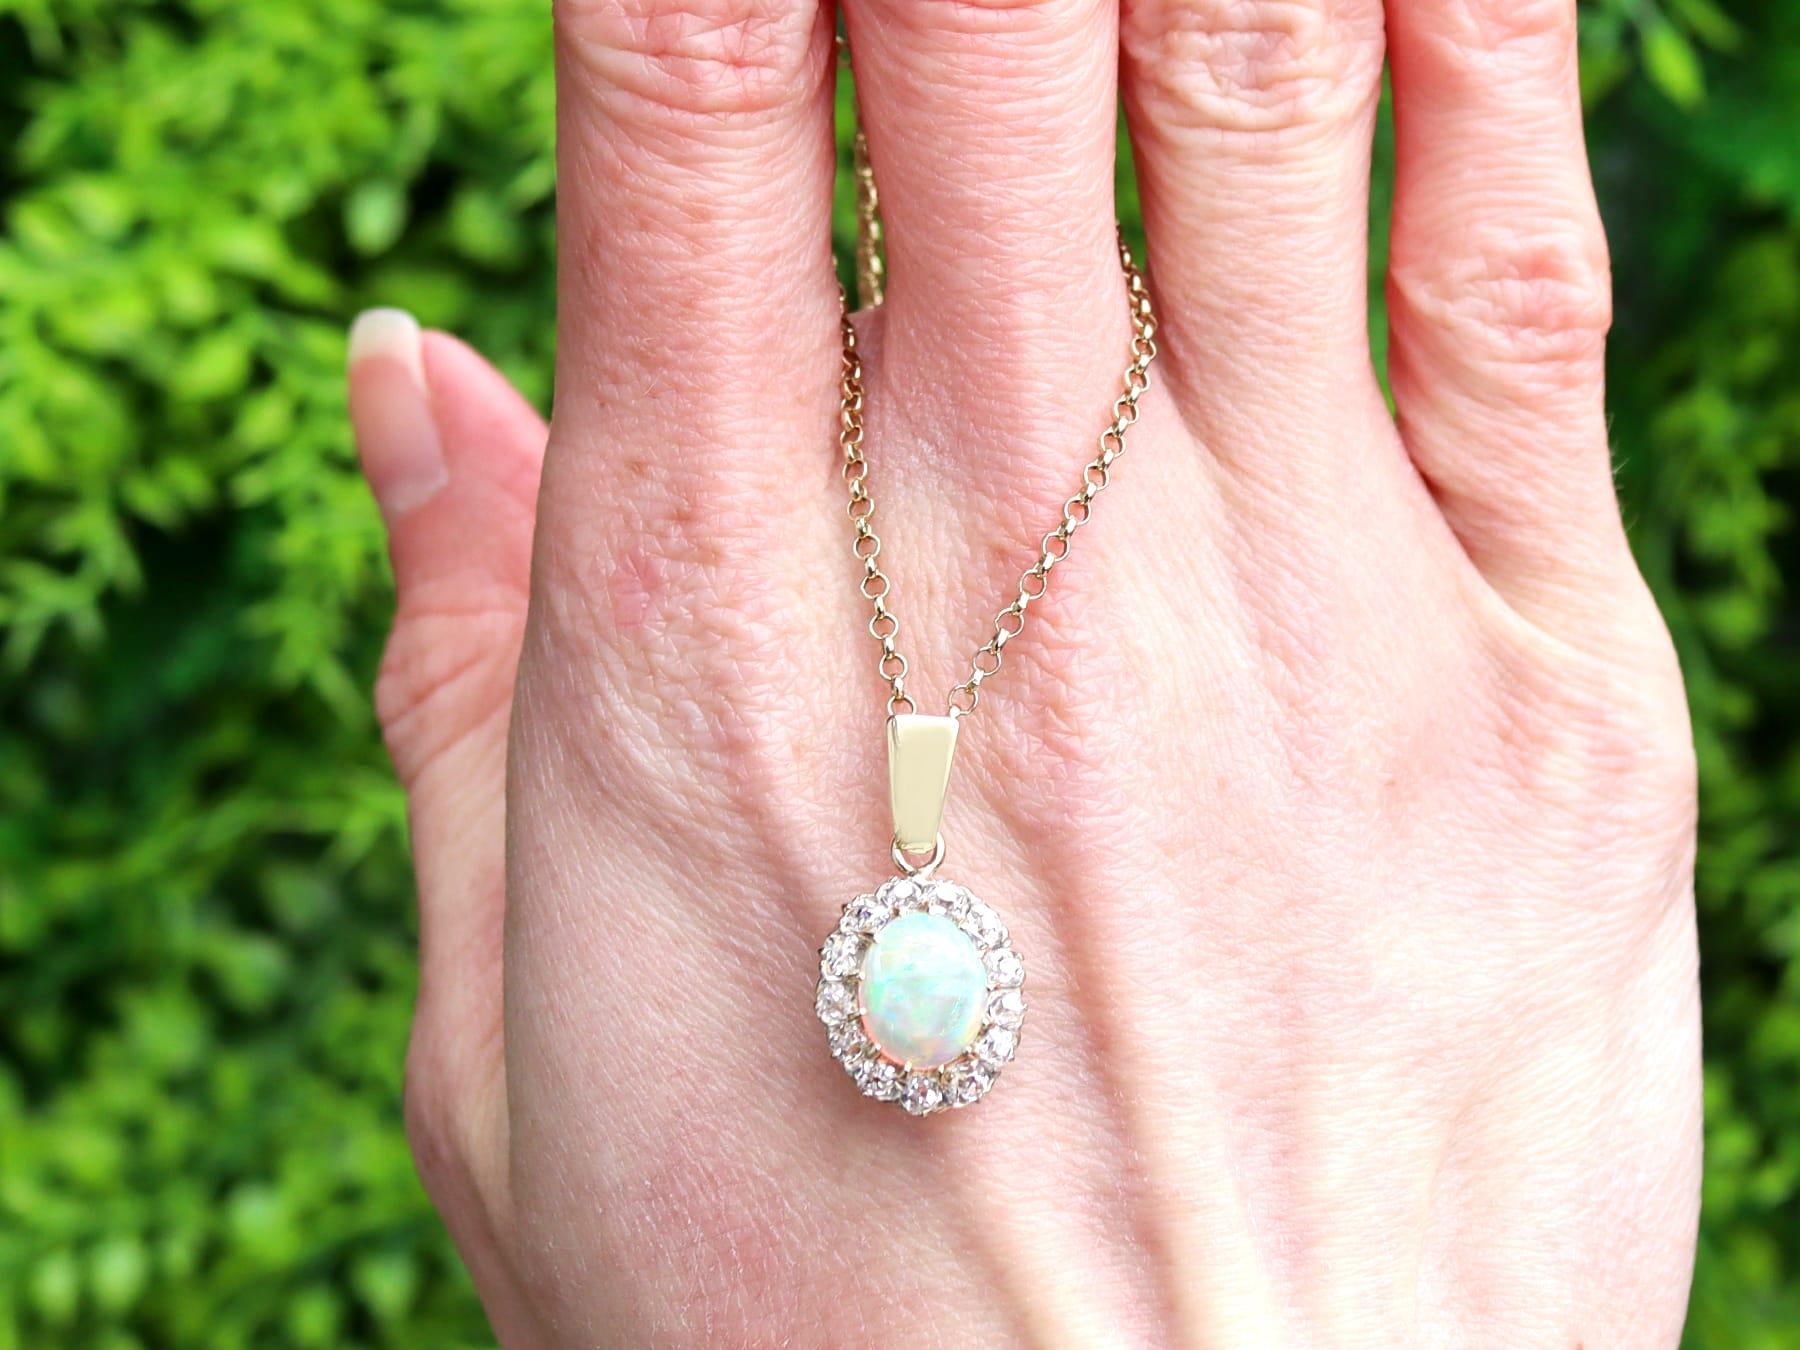 A stunning and impressive antique 1.99 carat white opal and 1.02 carat diamond, 9 karat yellow gold cluster pendant; part of our diverse antique jewellery collections

This stunning, fine and impressive antique opal cluster pendant has been crafted